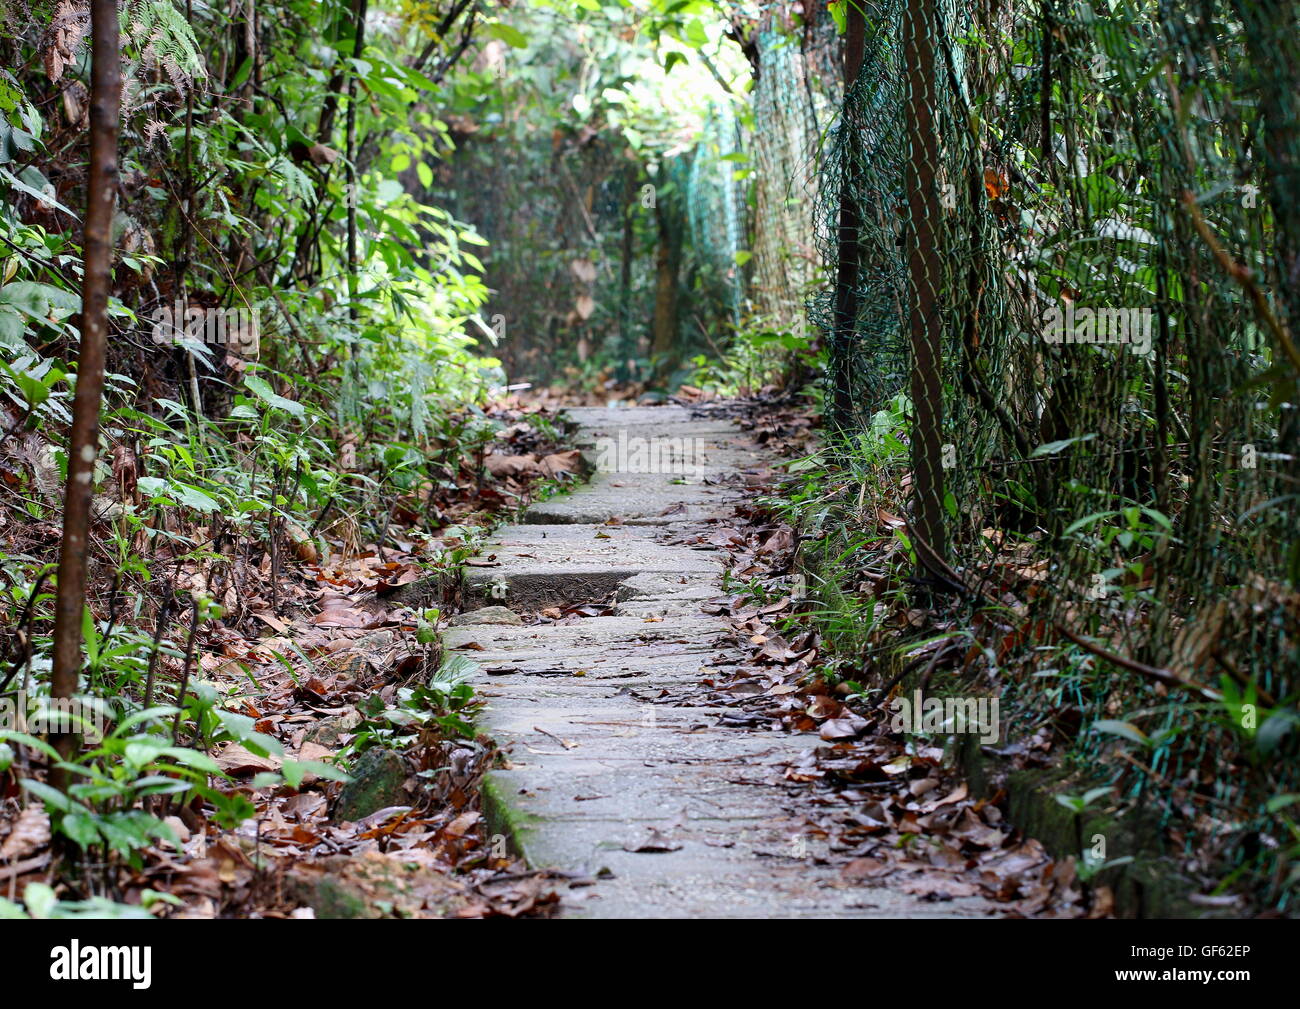 Jungle trail with concrete pathway in an urban forest for weekend recreation. Stock Photo